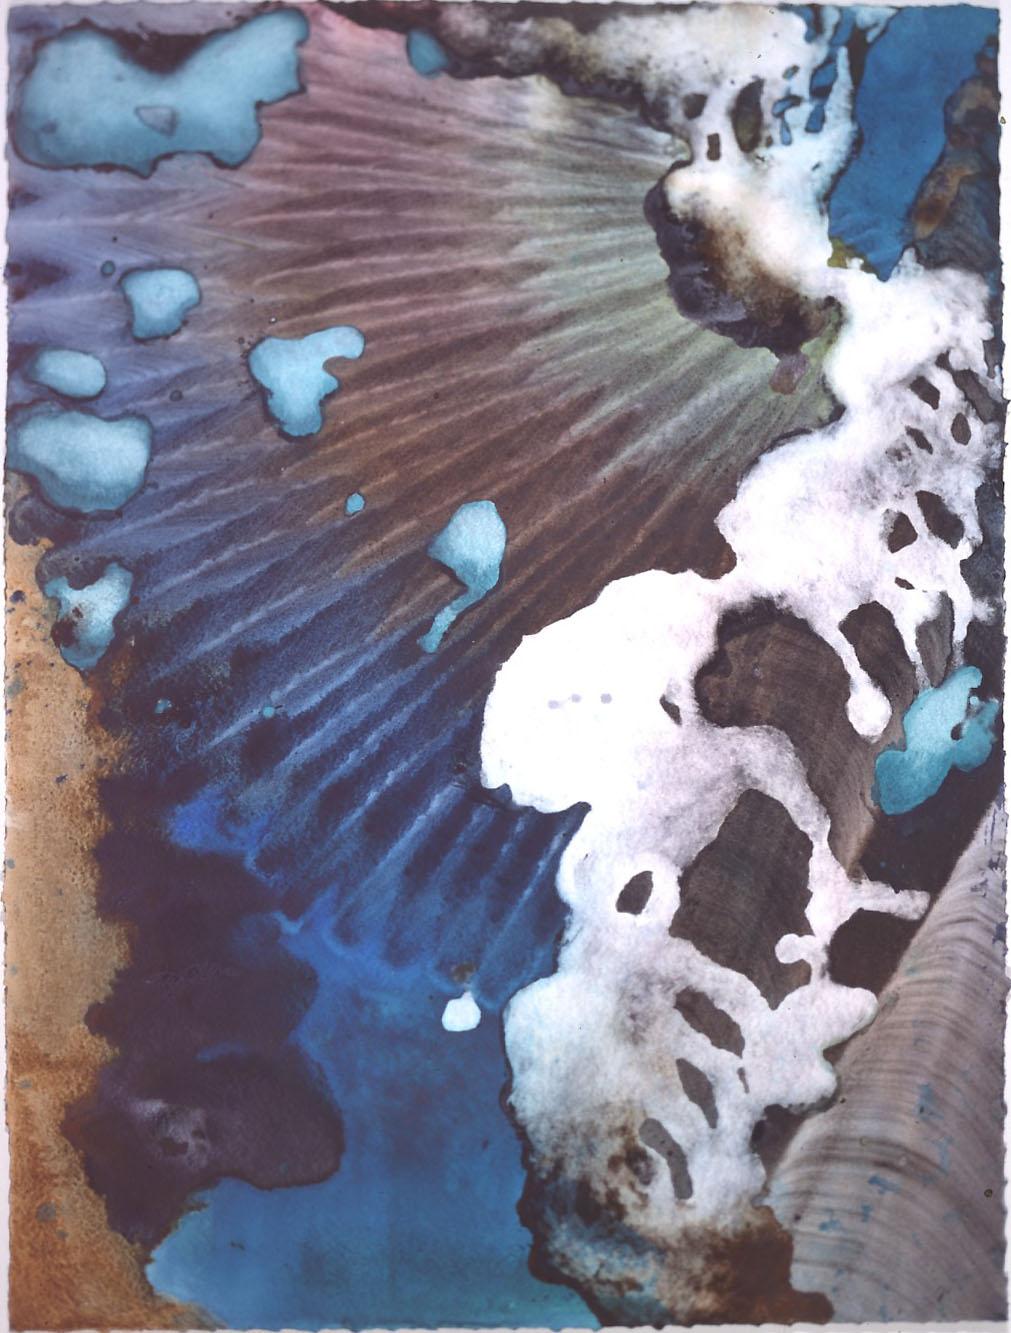  "Turquoise Floating" 1999, Turquoise Floating Series, acrylic on paper, 42 x 32 inches (107 x 81 cm). 